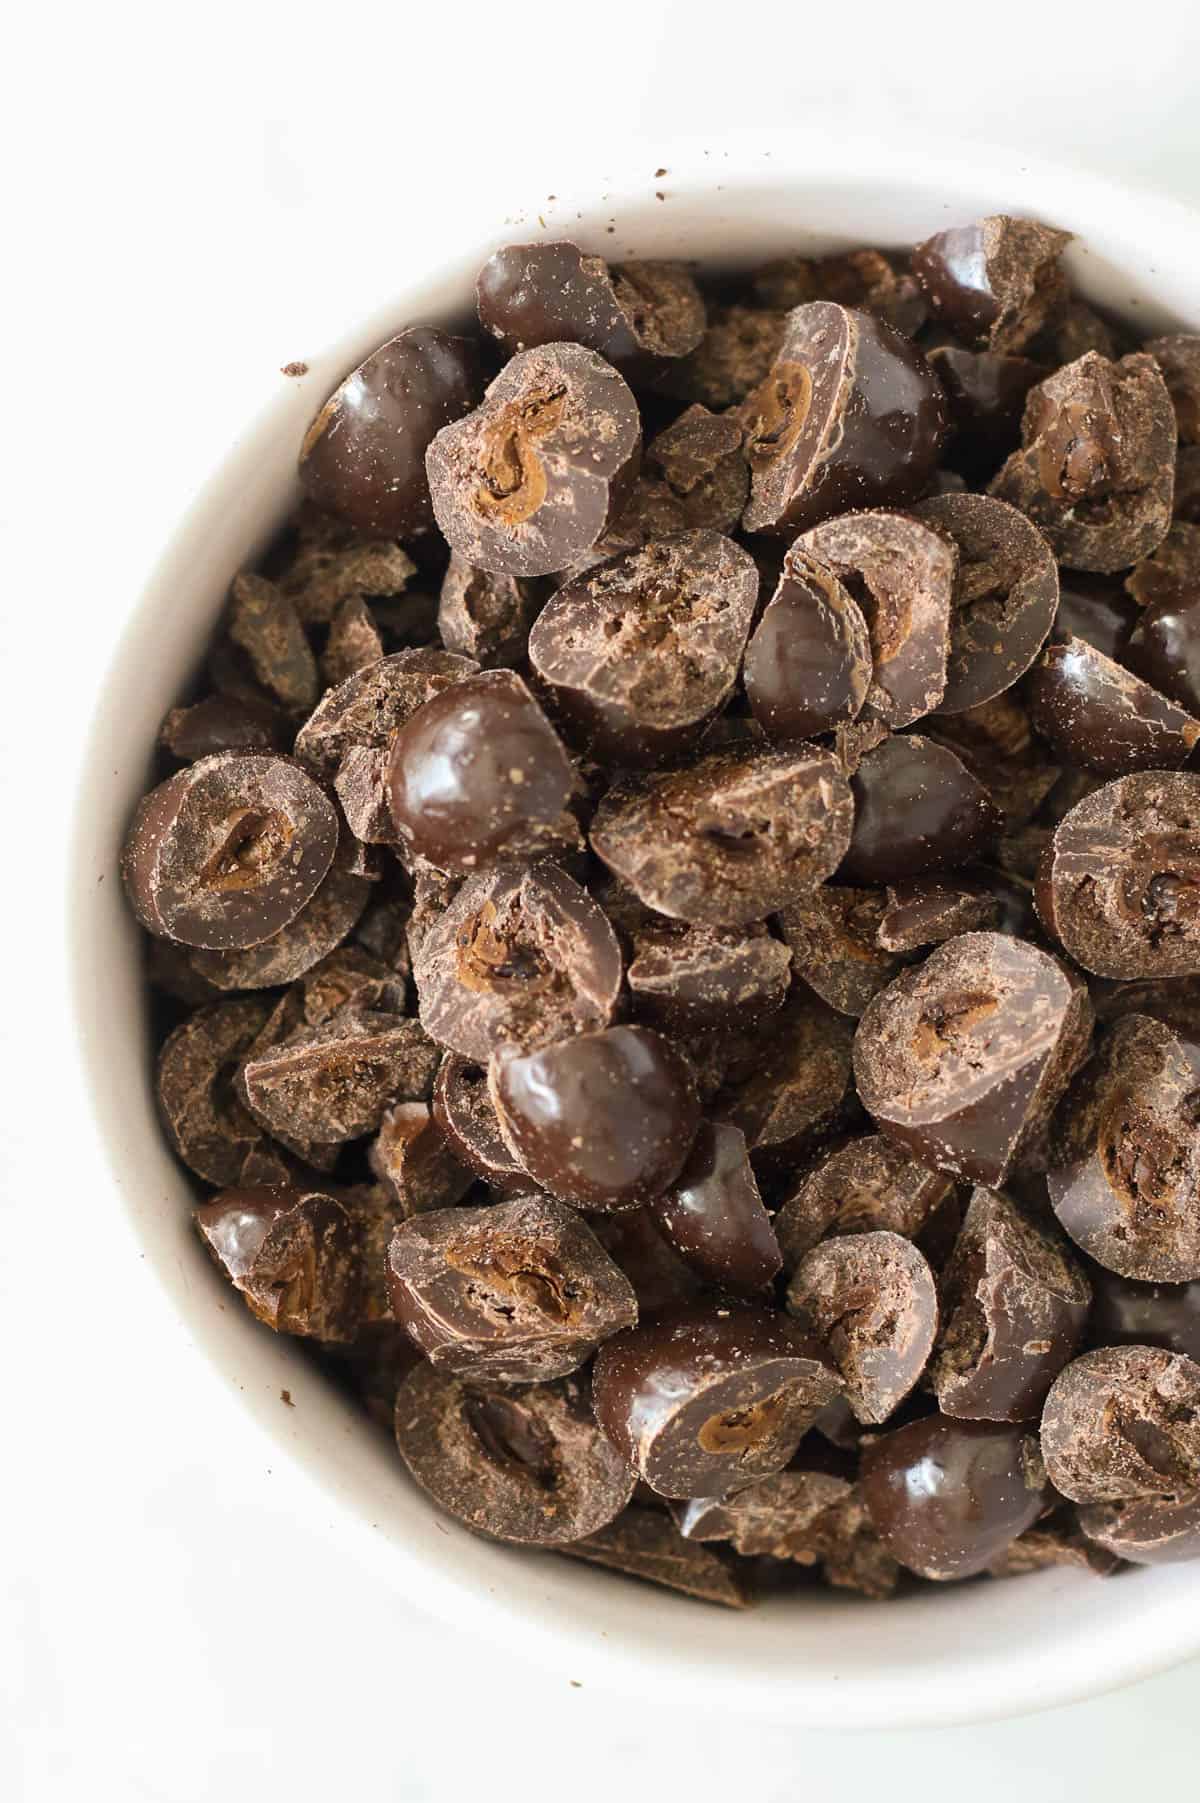 Choppedchocolate covered espresso beans in a white bowl